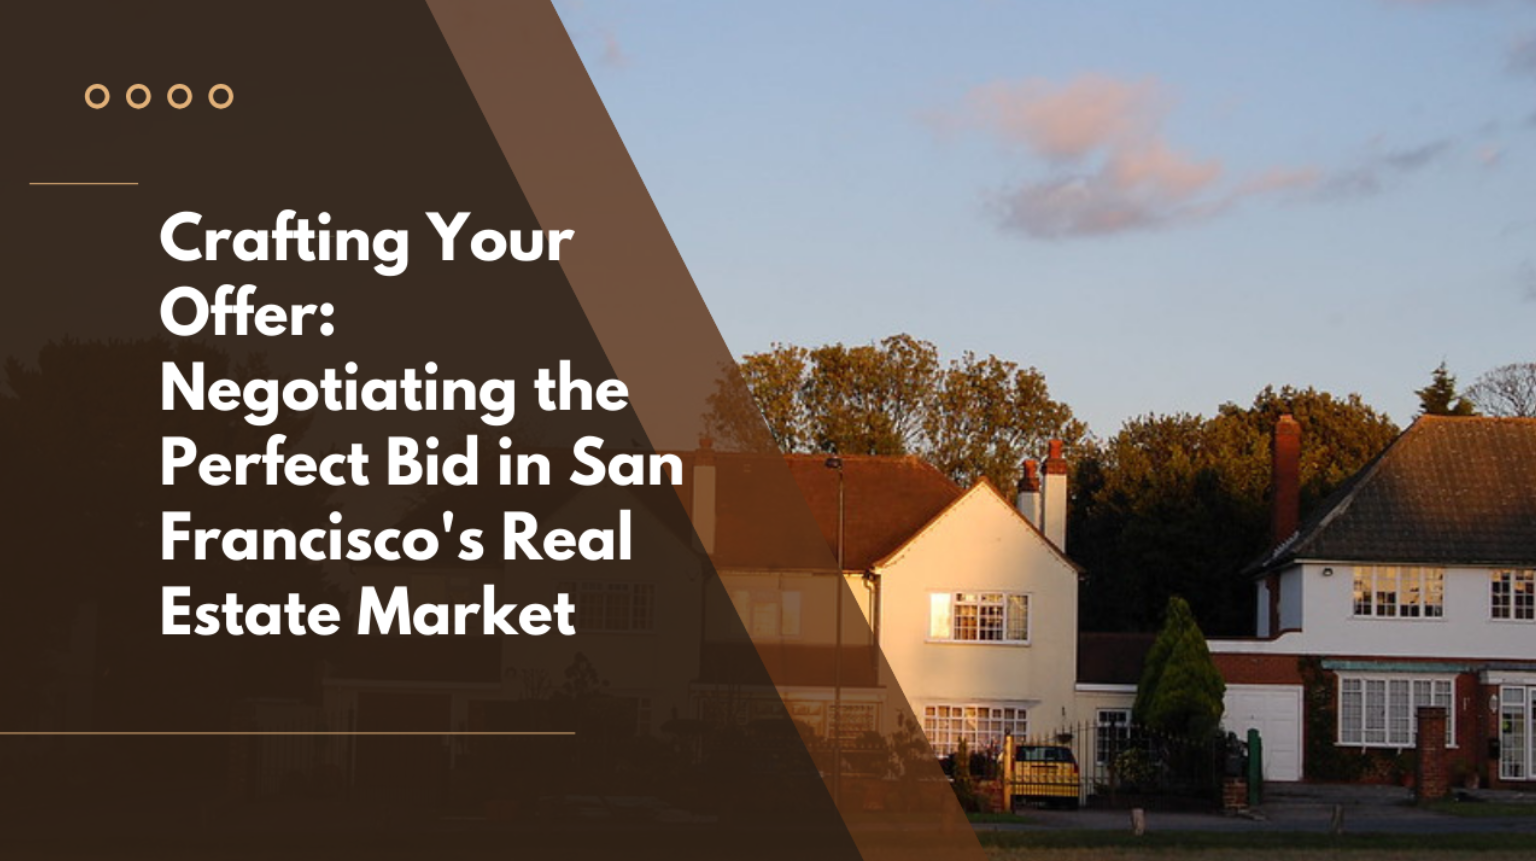 Crafting Your Offer: Negotiating the Perfect Bid in San Francisco’s Real Estate Market